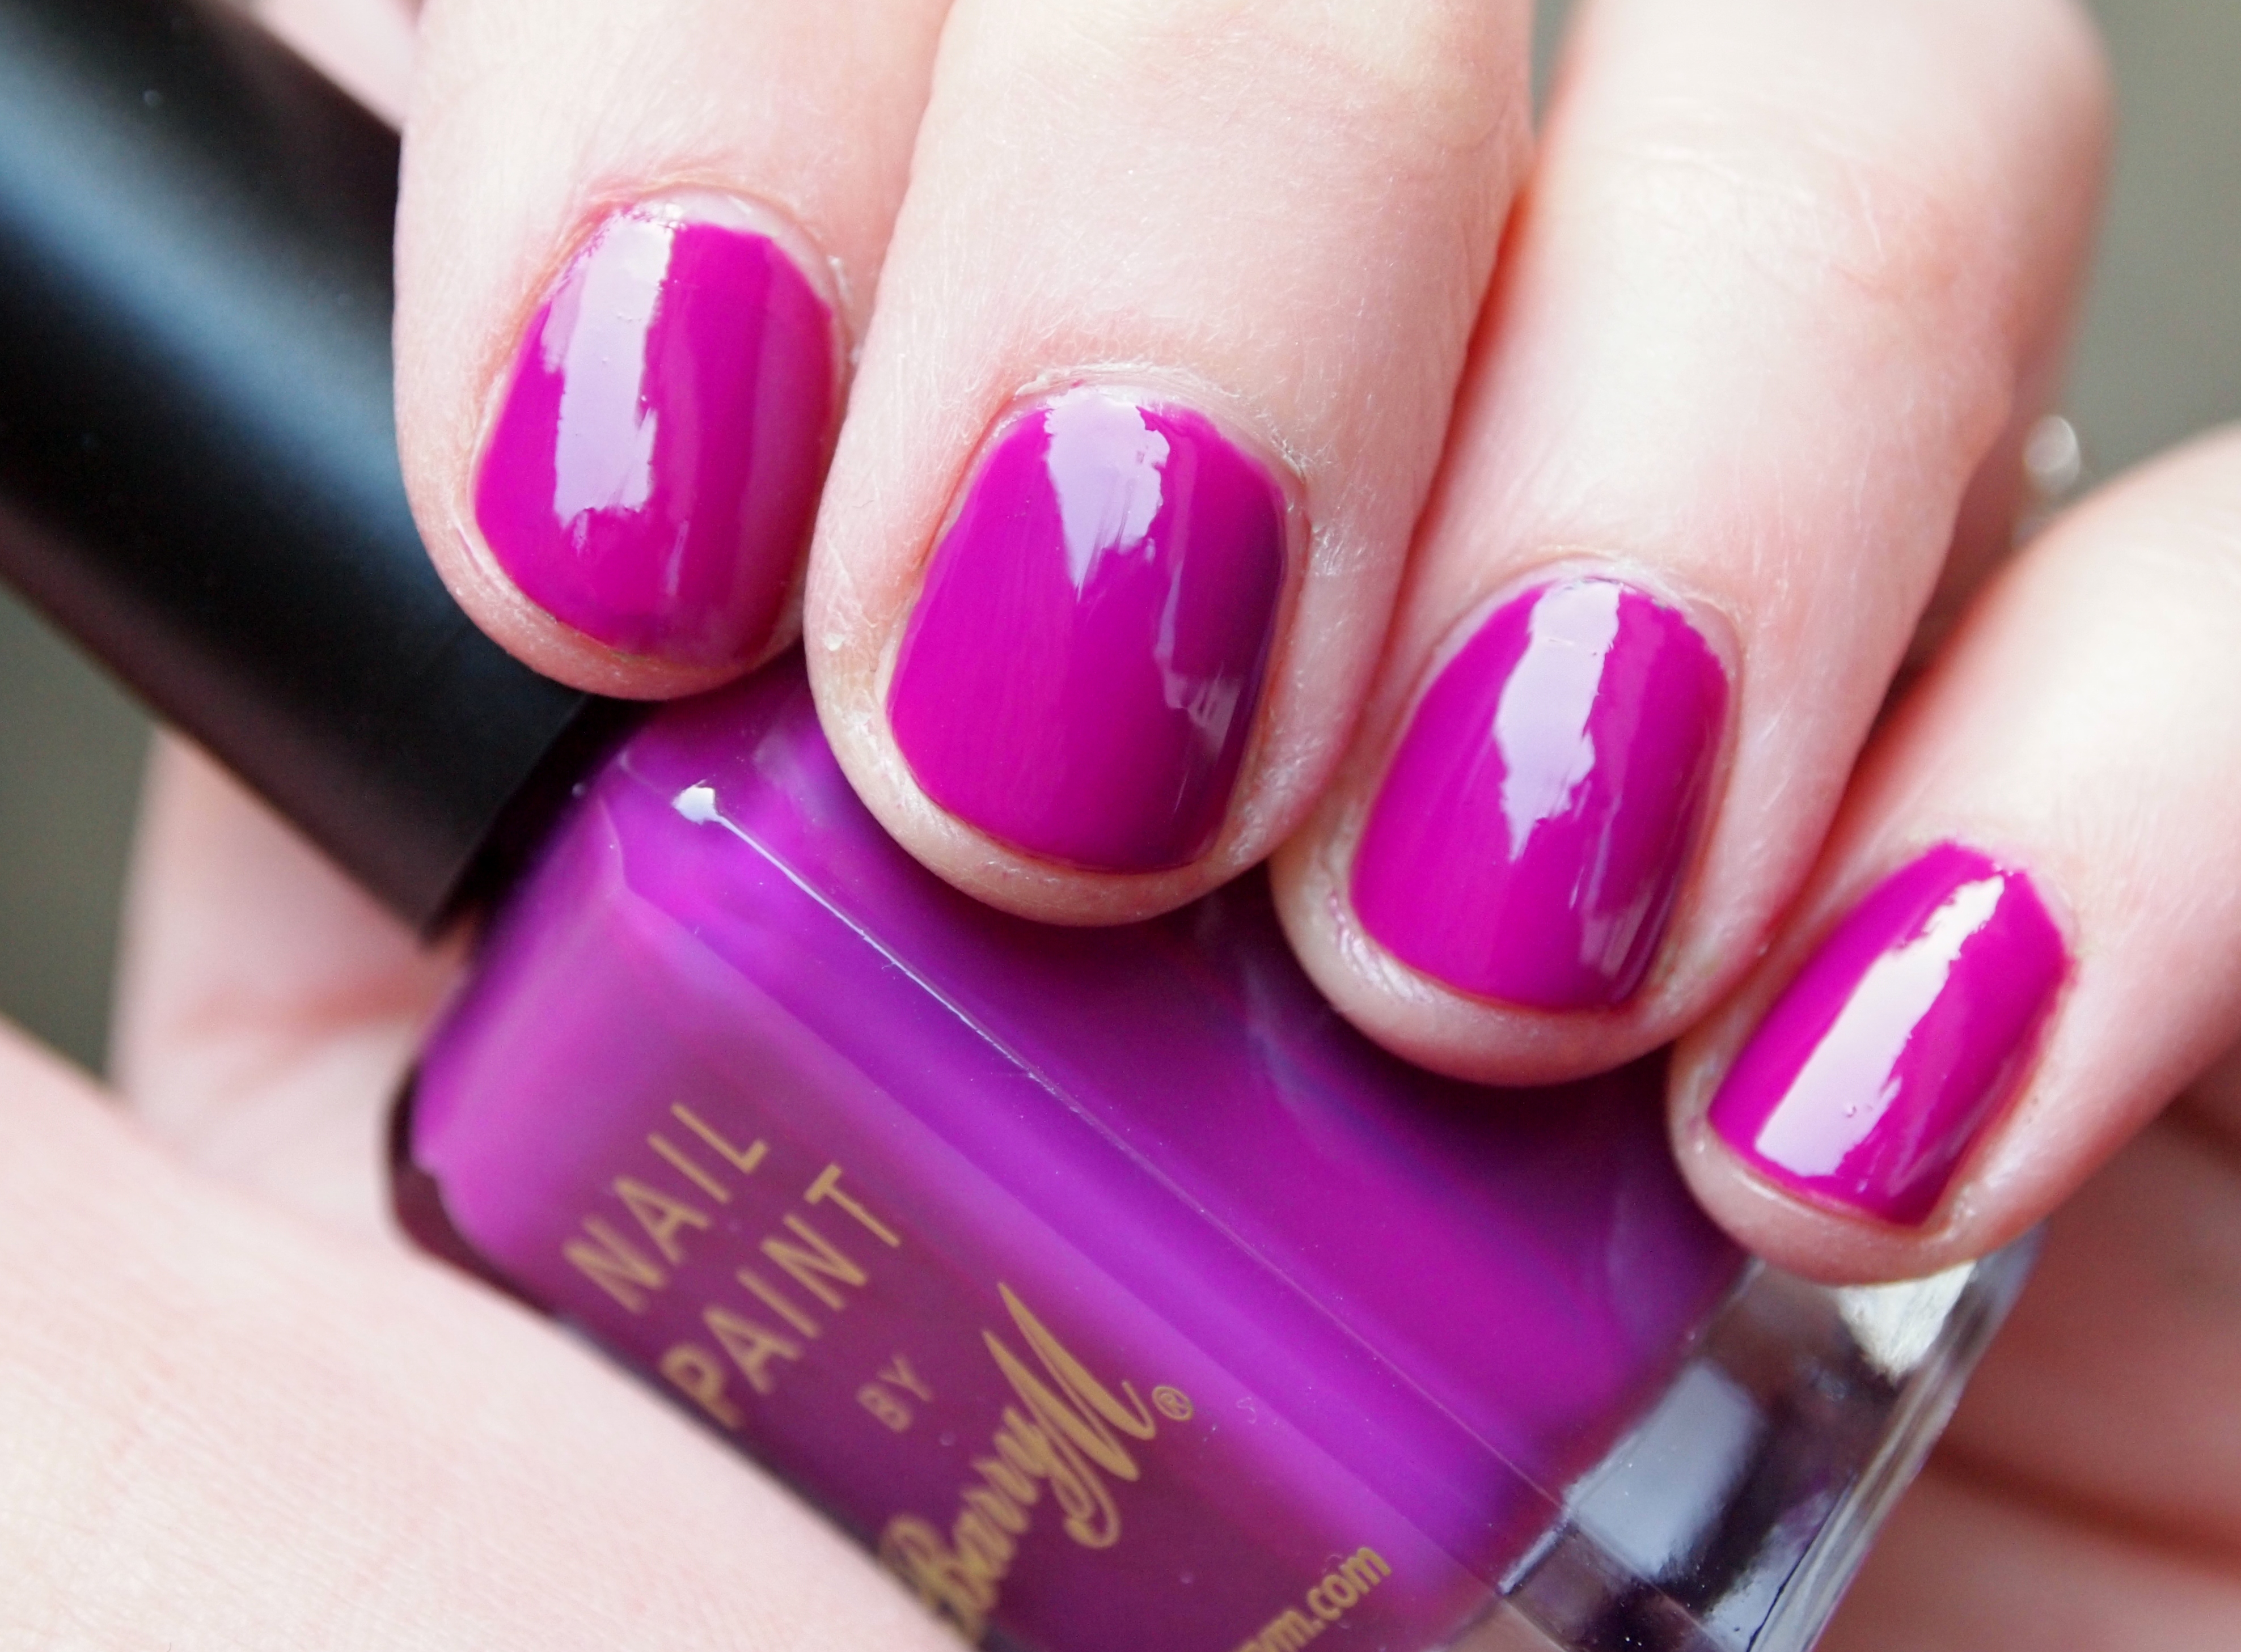 9. "Vegan and Cruelty-Free Nail Paints for Nail Art" - wide 1